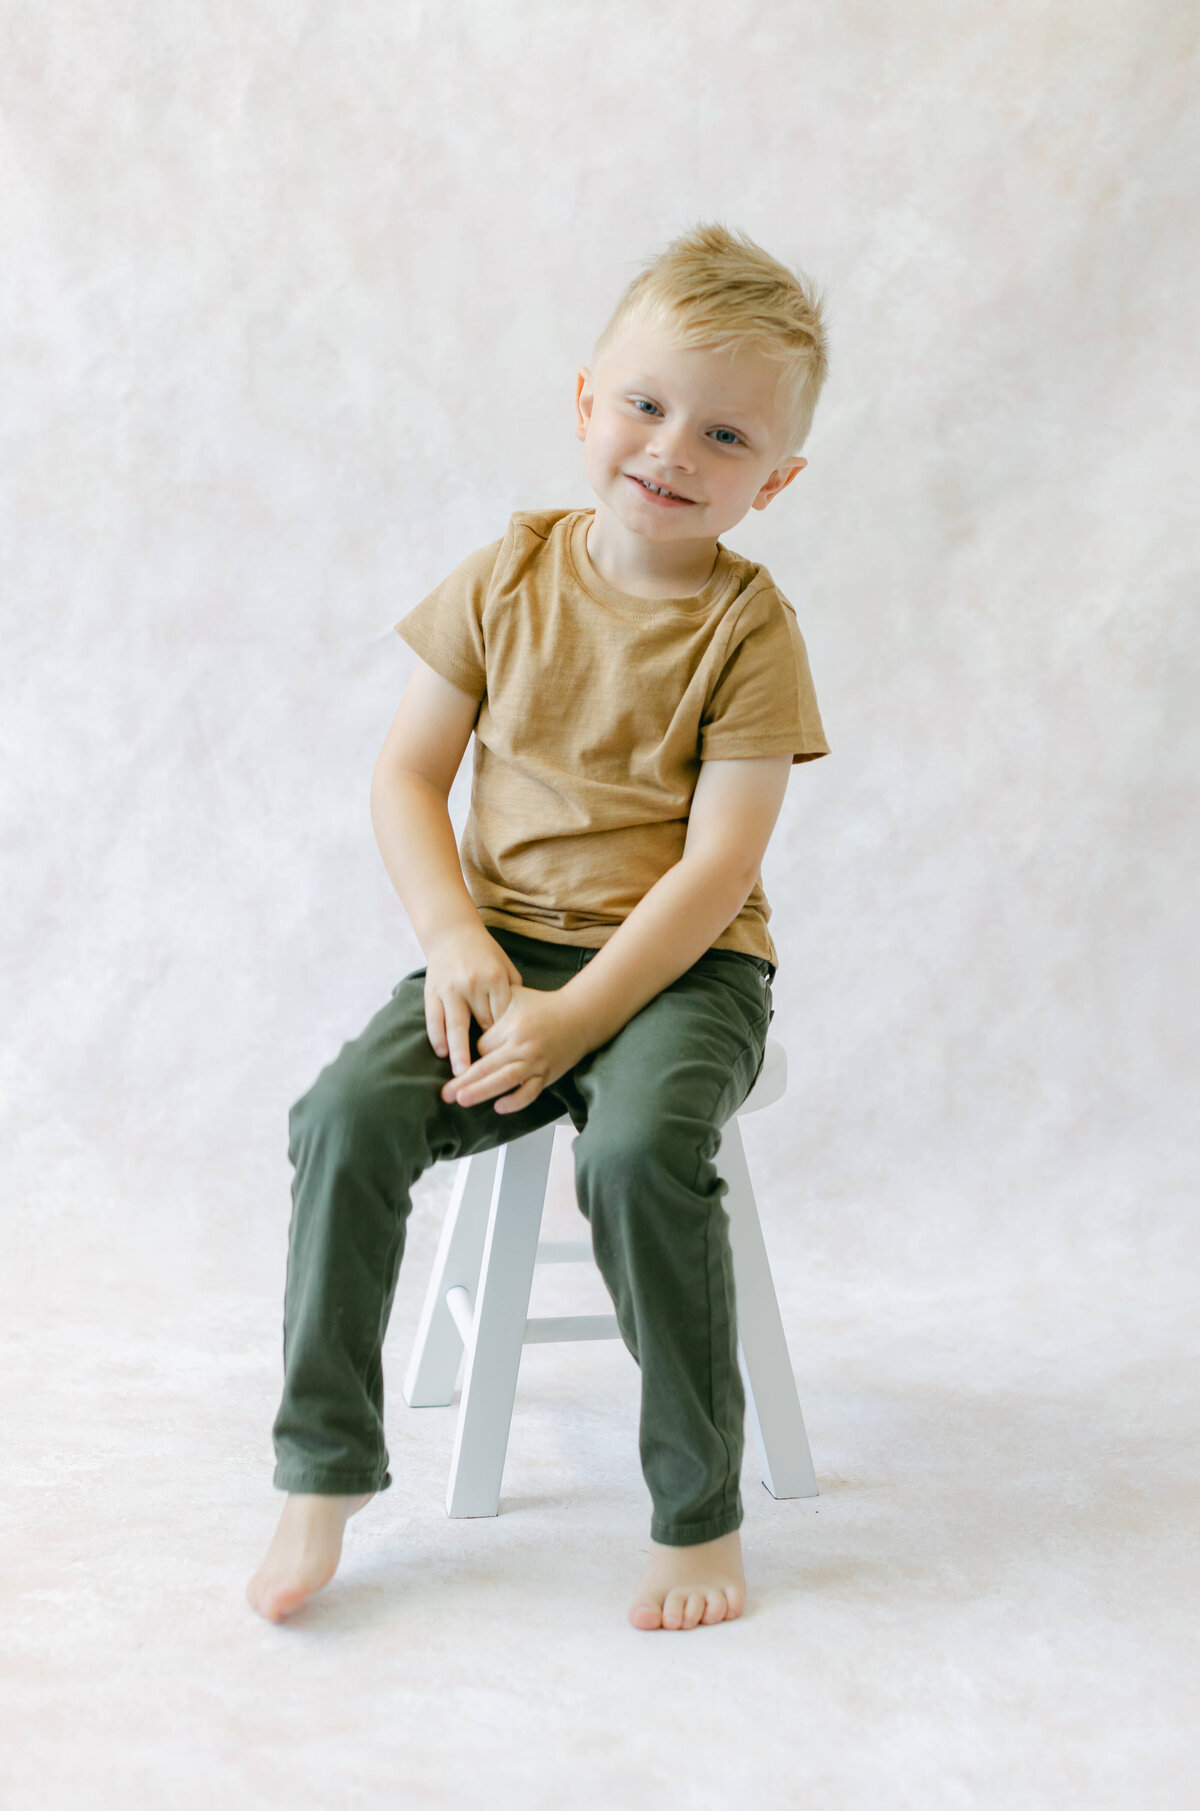 A young boy smiles while sitting on a white stool